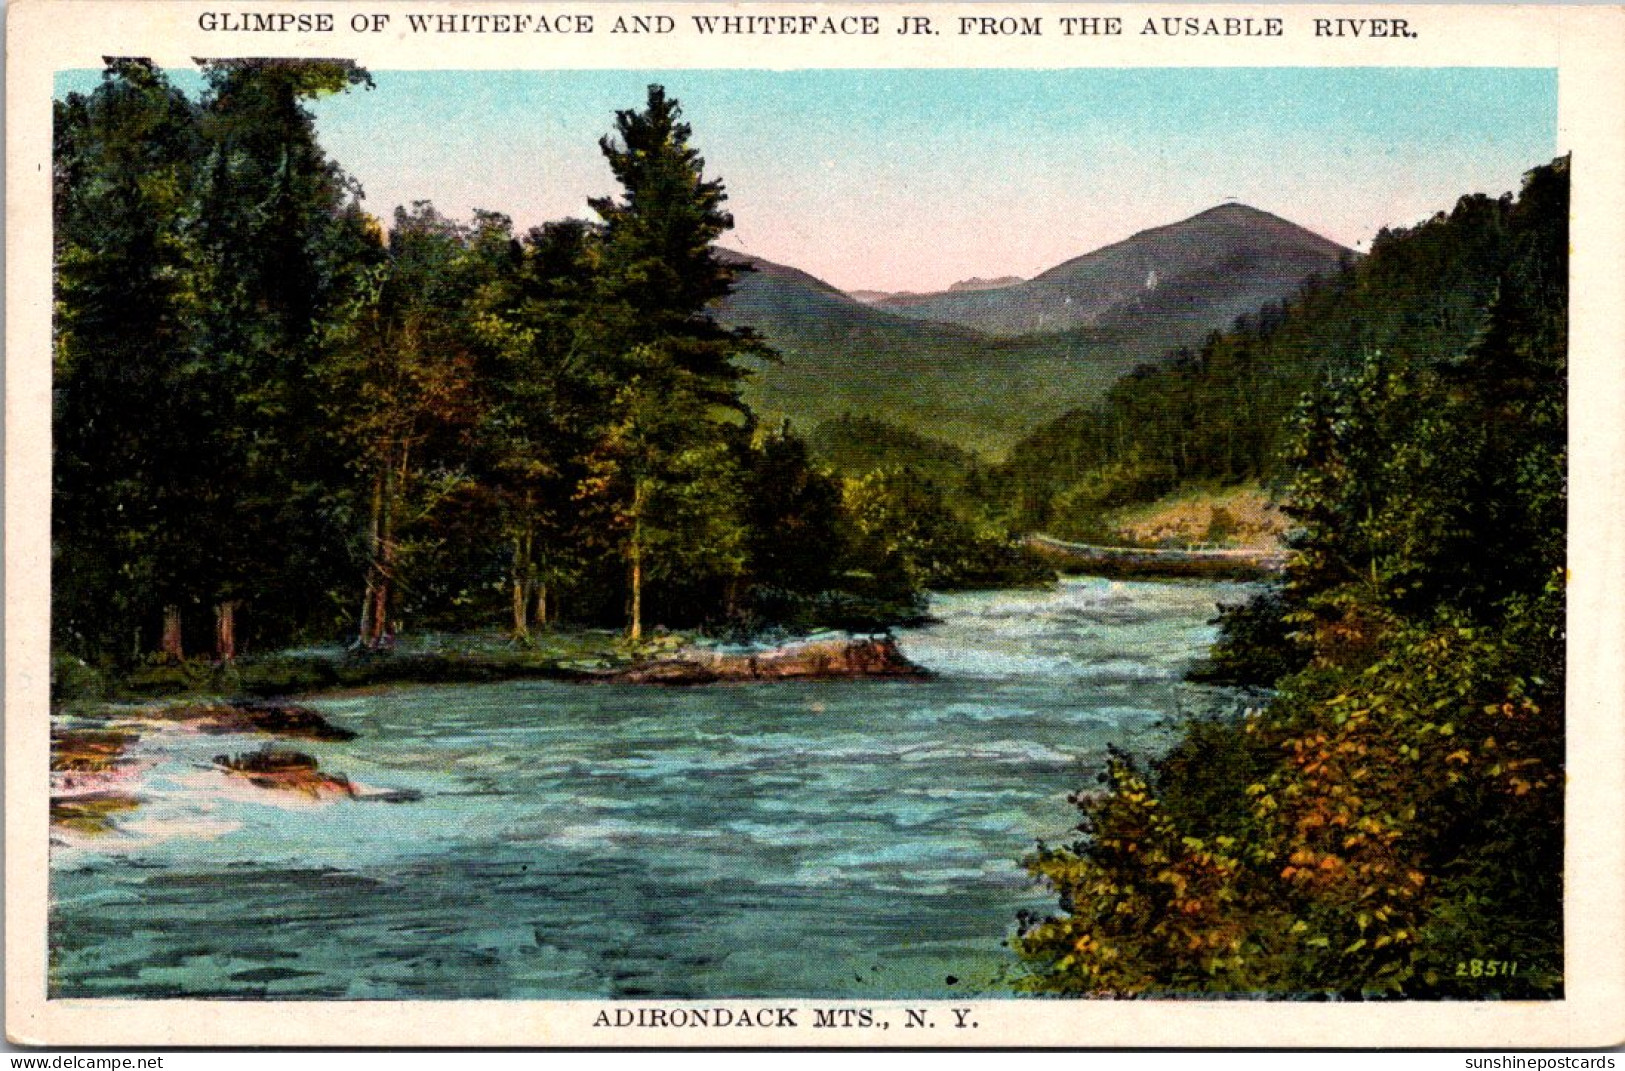 New York Adirondacks Glimpse Of Whiteface Mountain And Whiteface Jr From The Ausable River  - Adirondack